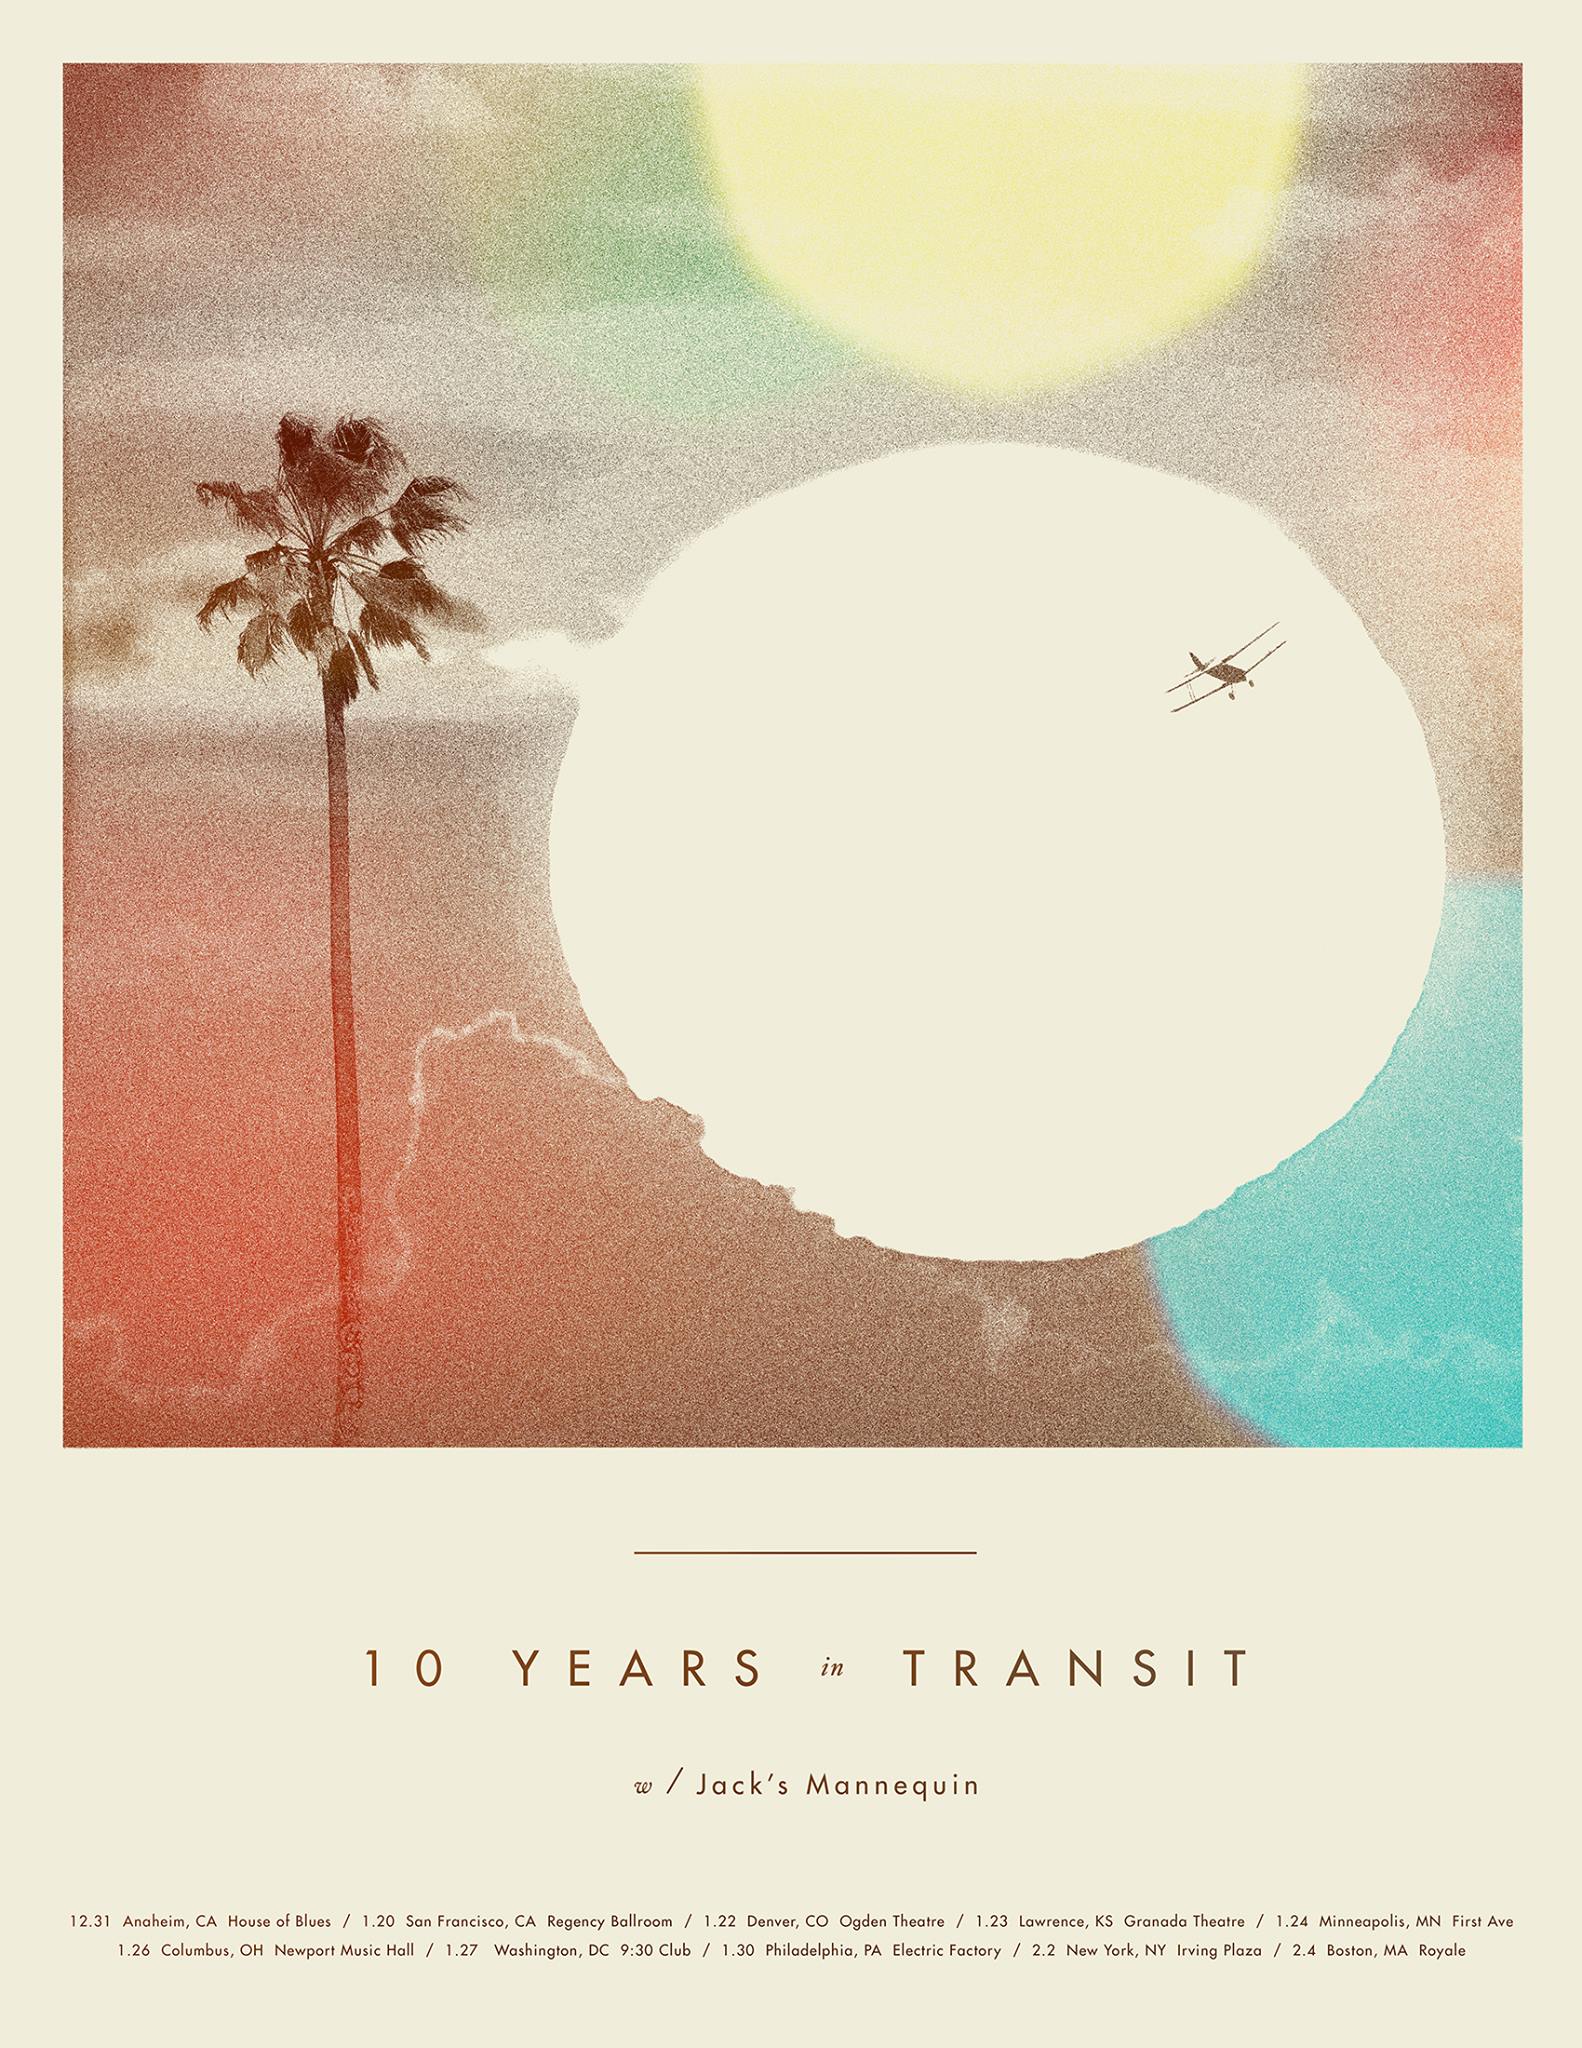 Jack's Mannequin 10 Years in Transits On Sale Everywhere